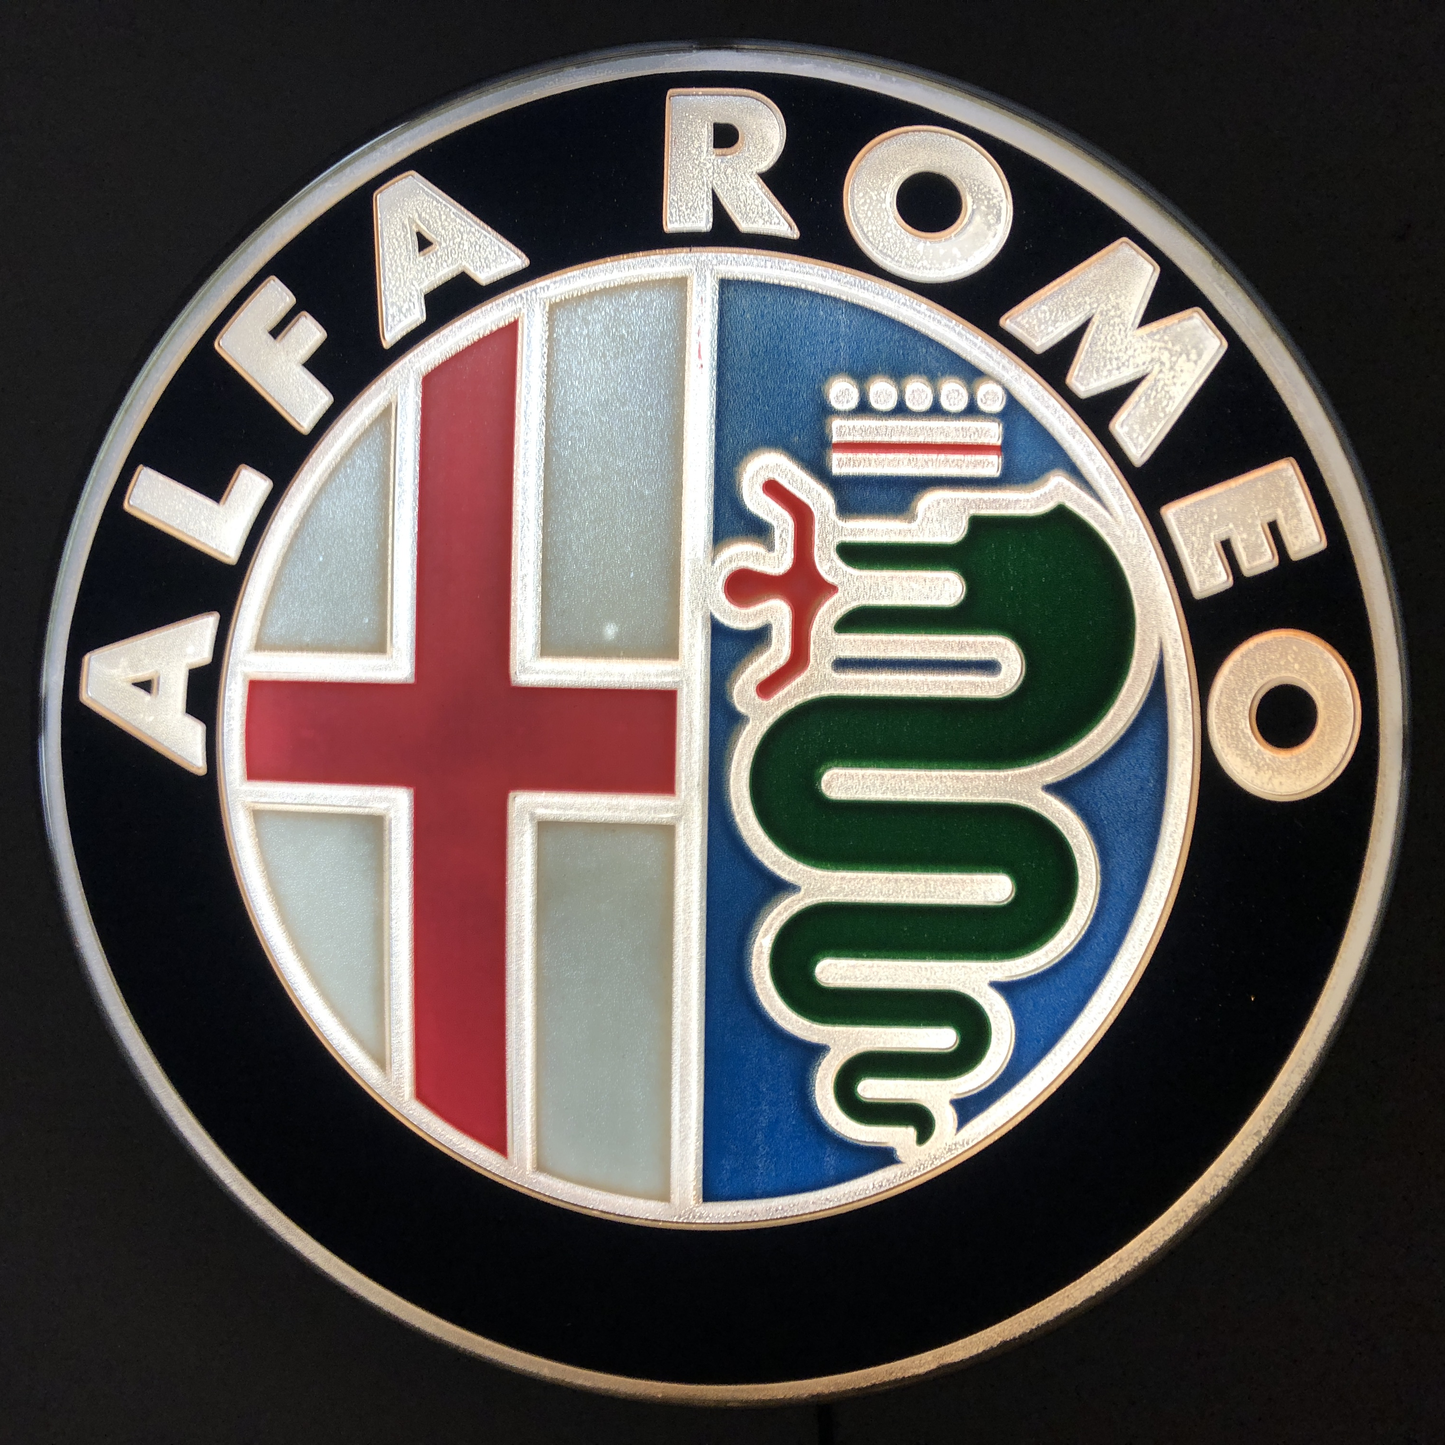 Alfa Romeo, Original Alfa Romeo Vintage Illuminated Sign from the 70s and 80s in working order